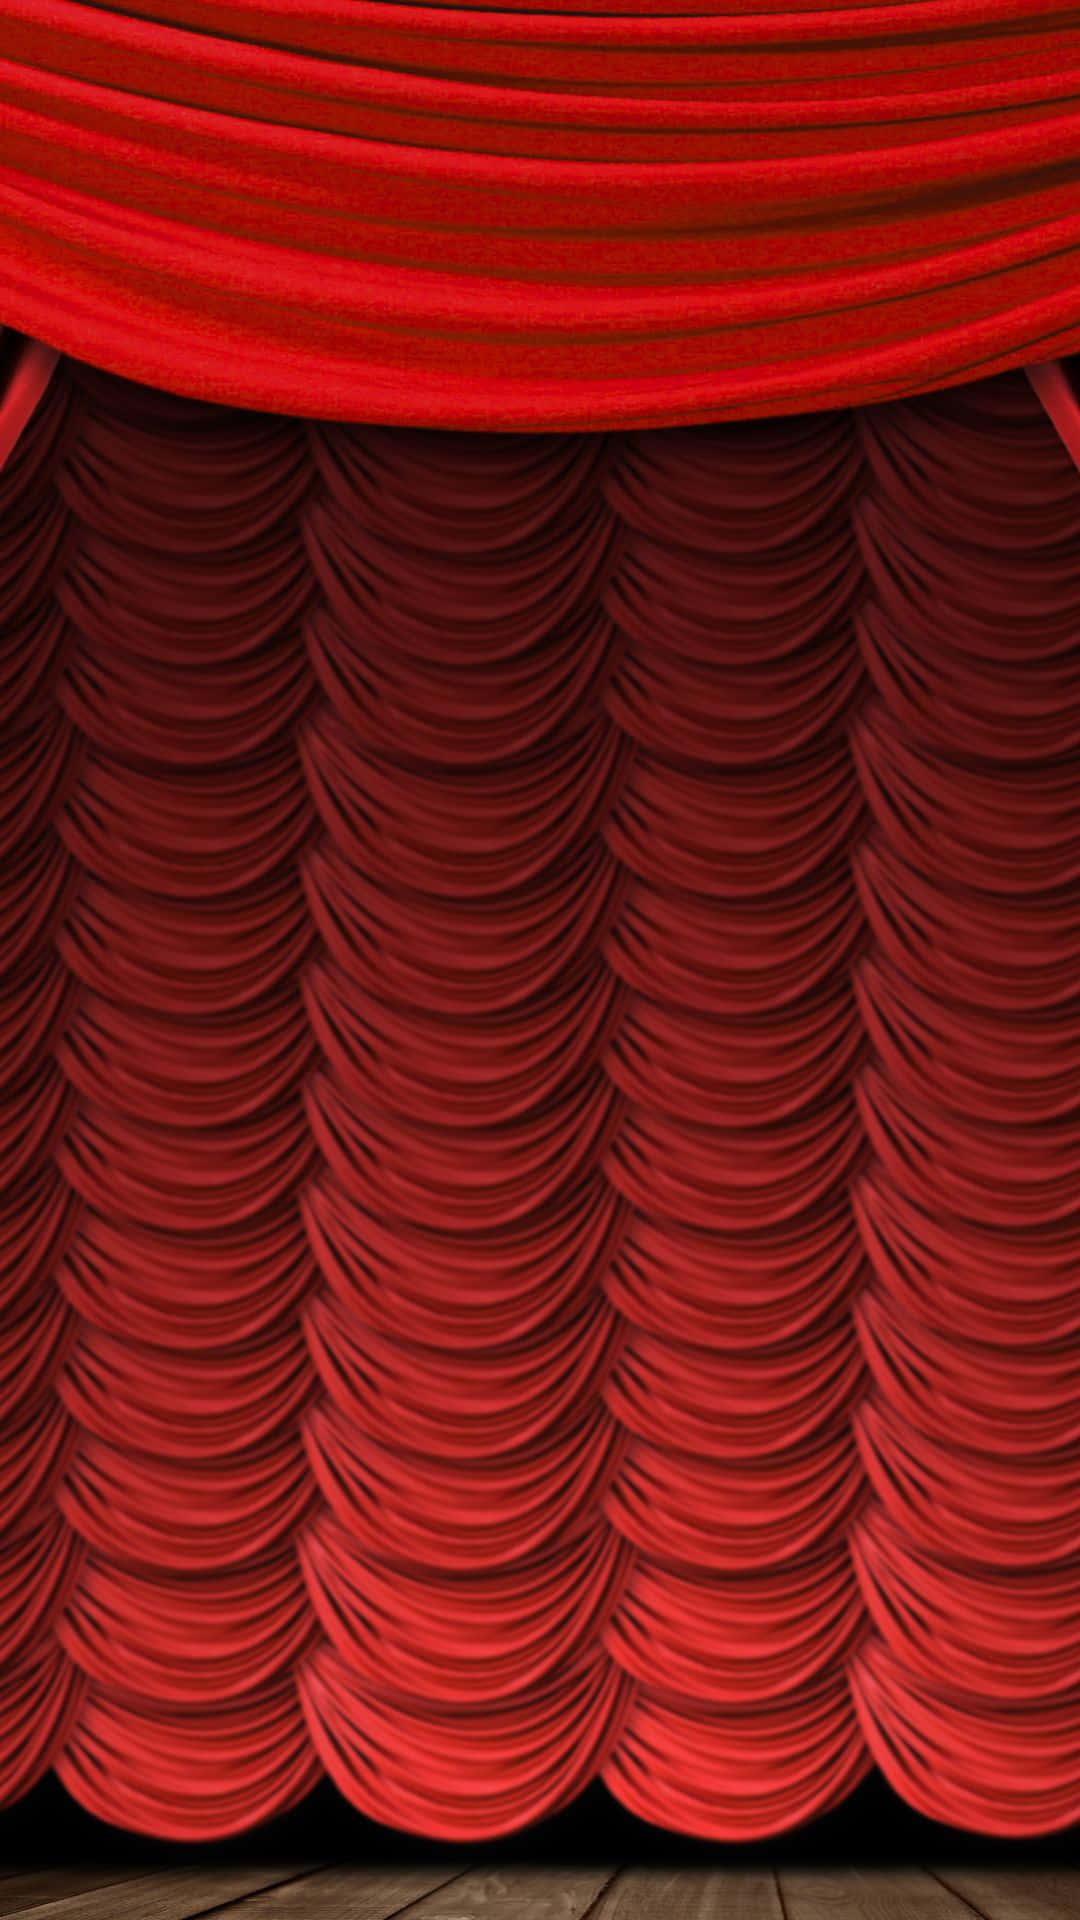 Red Curtain On Stage With Wooden Floor